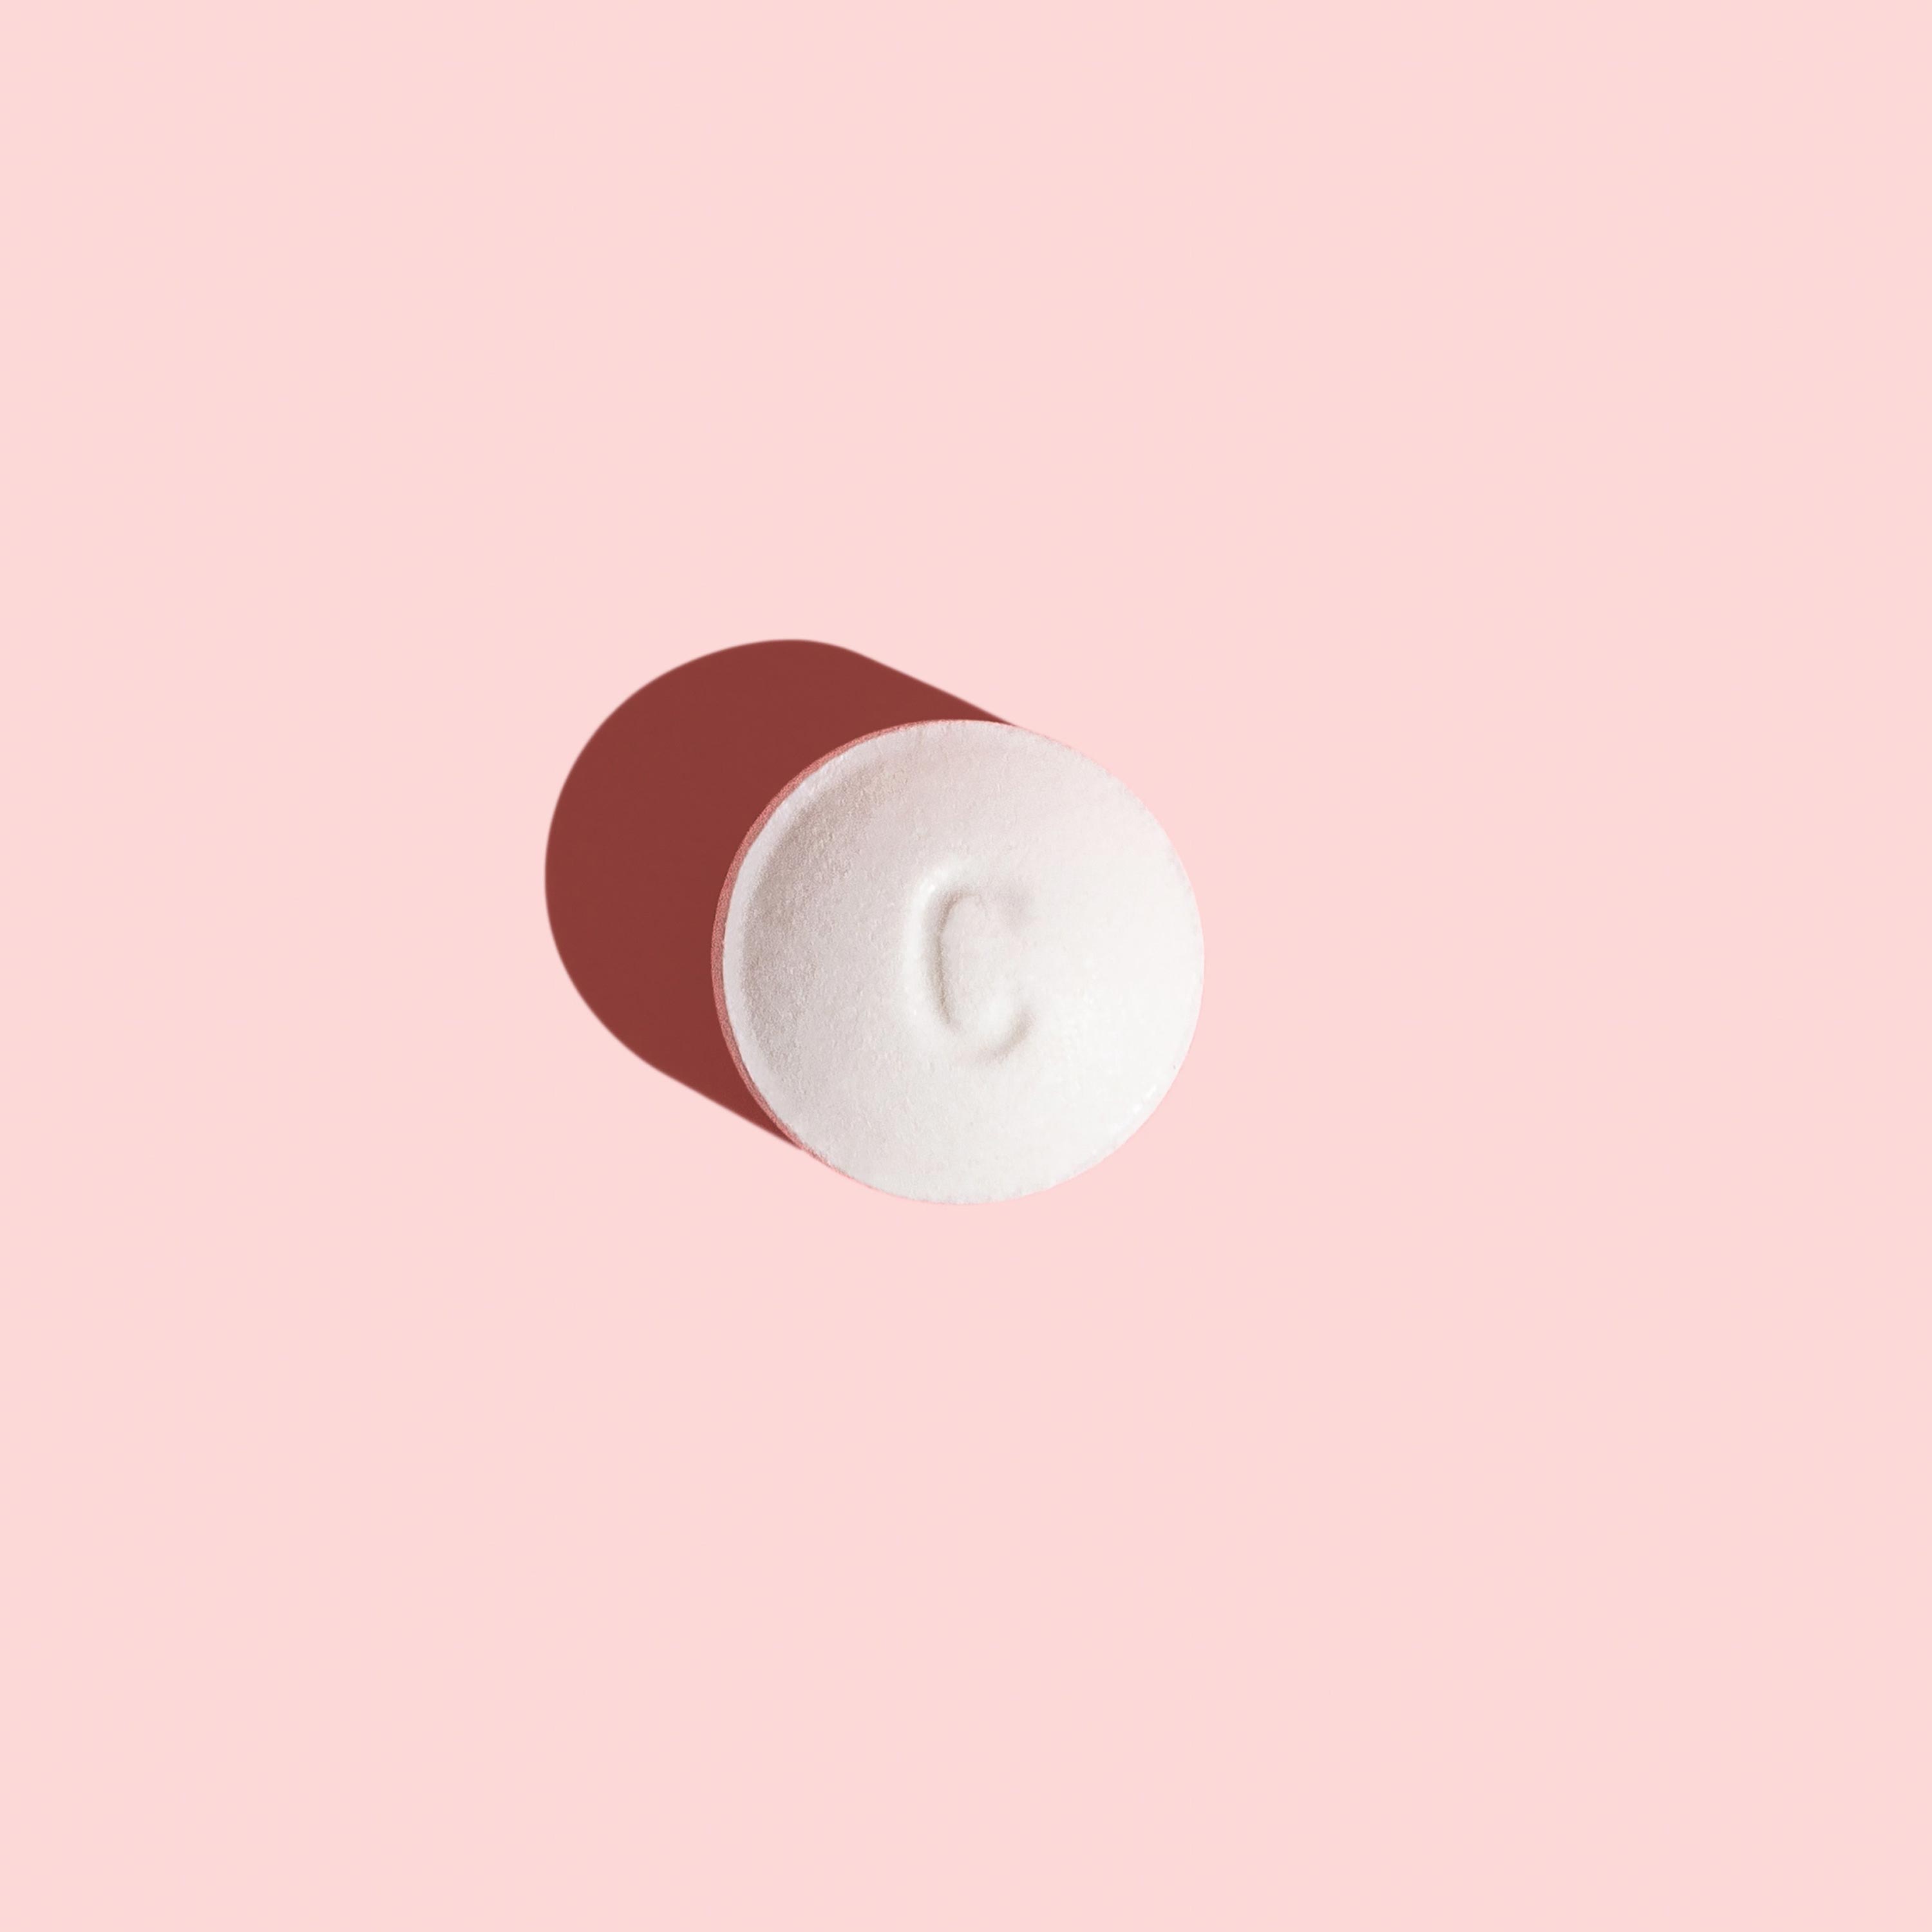 a single pill of Levonorgestrel (Generic PLAN B®) emergency contraception